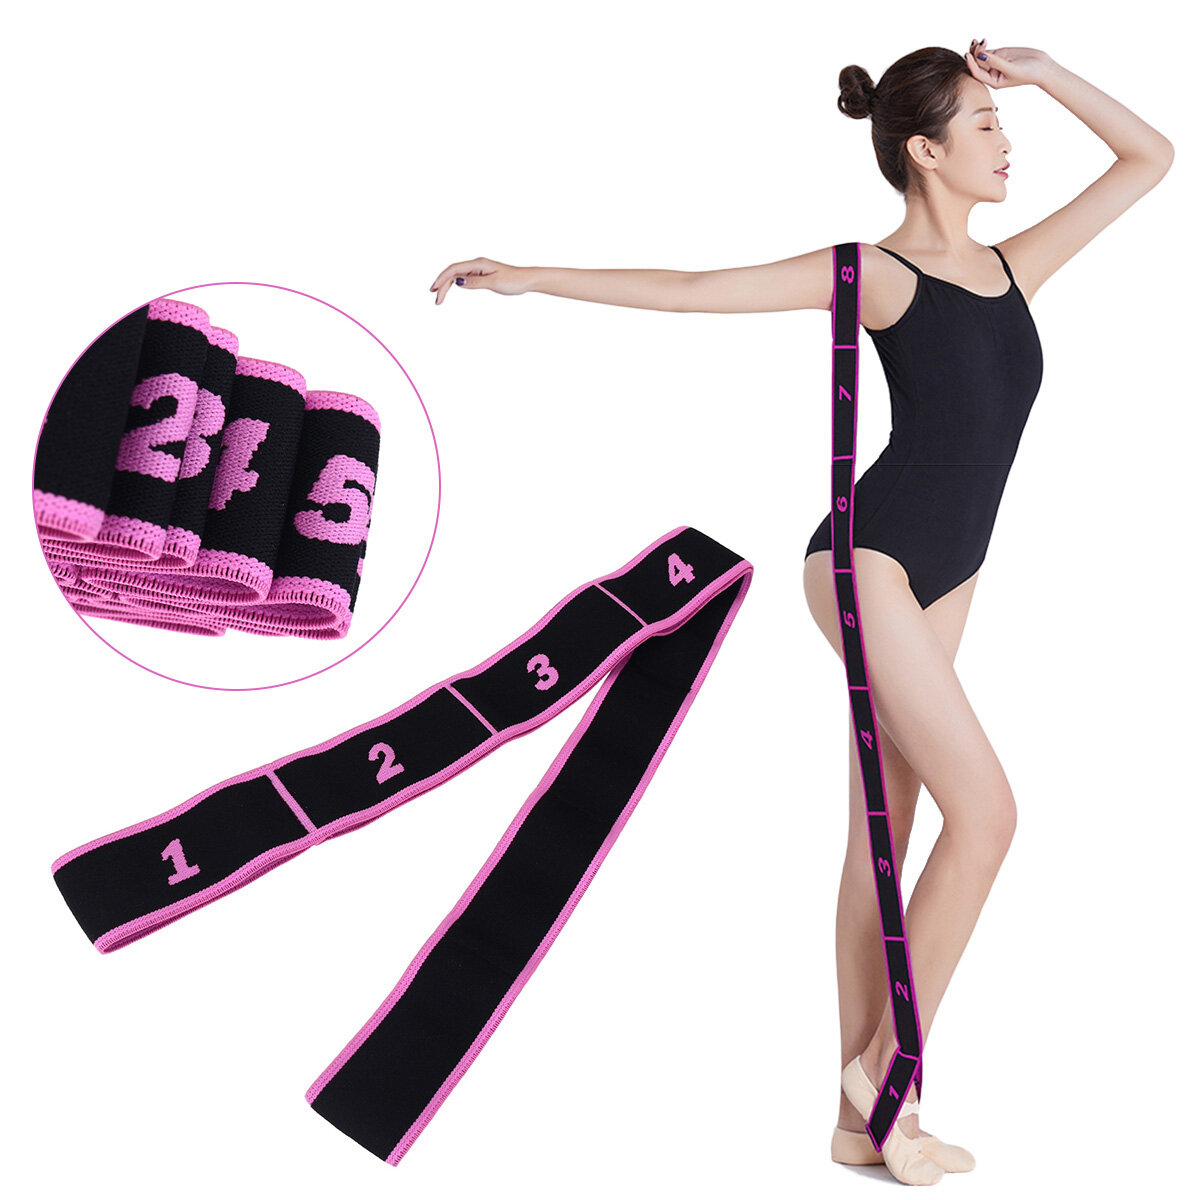 

1PC 80CM Latex Elastic Resistance Bands Yoga Training Assist Bands Home Gym Fitness Equipment